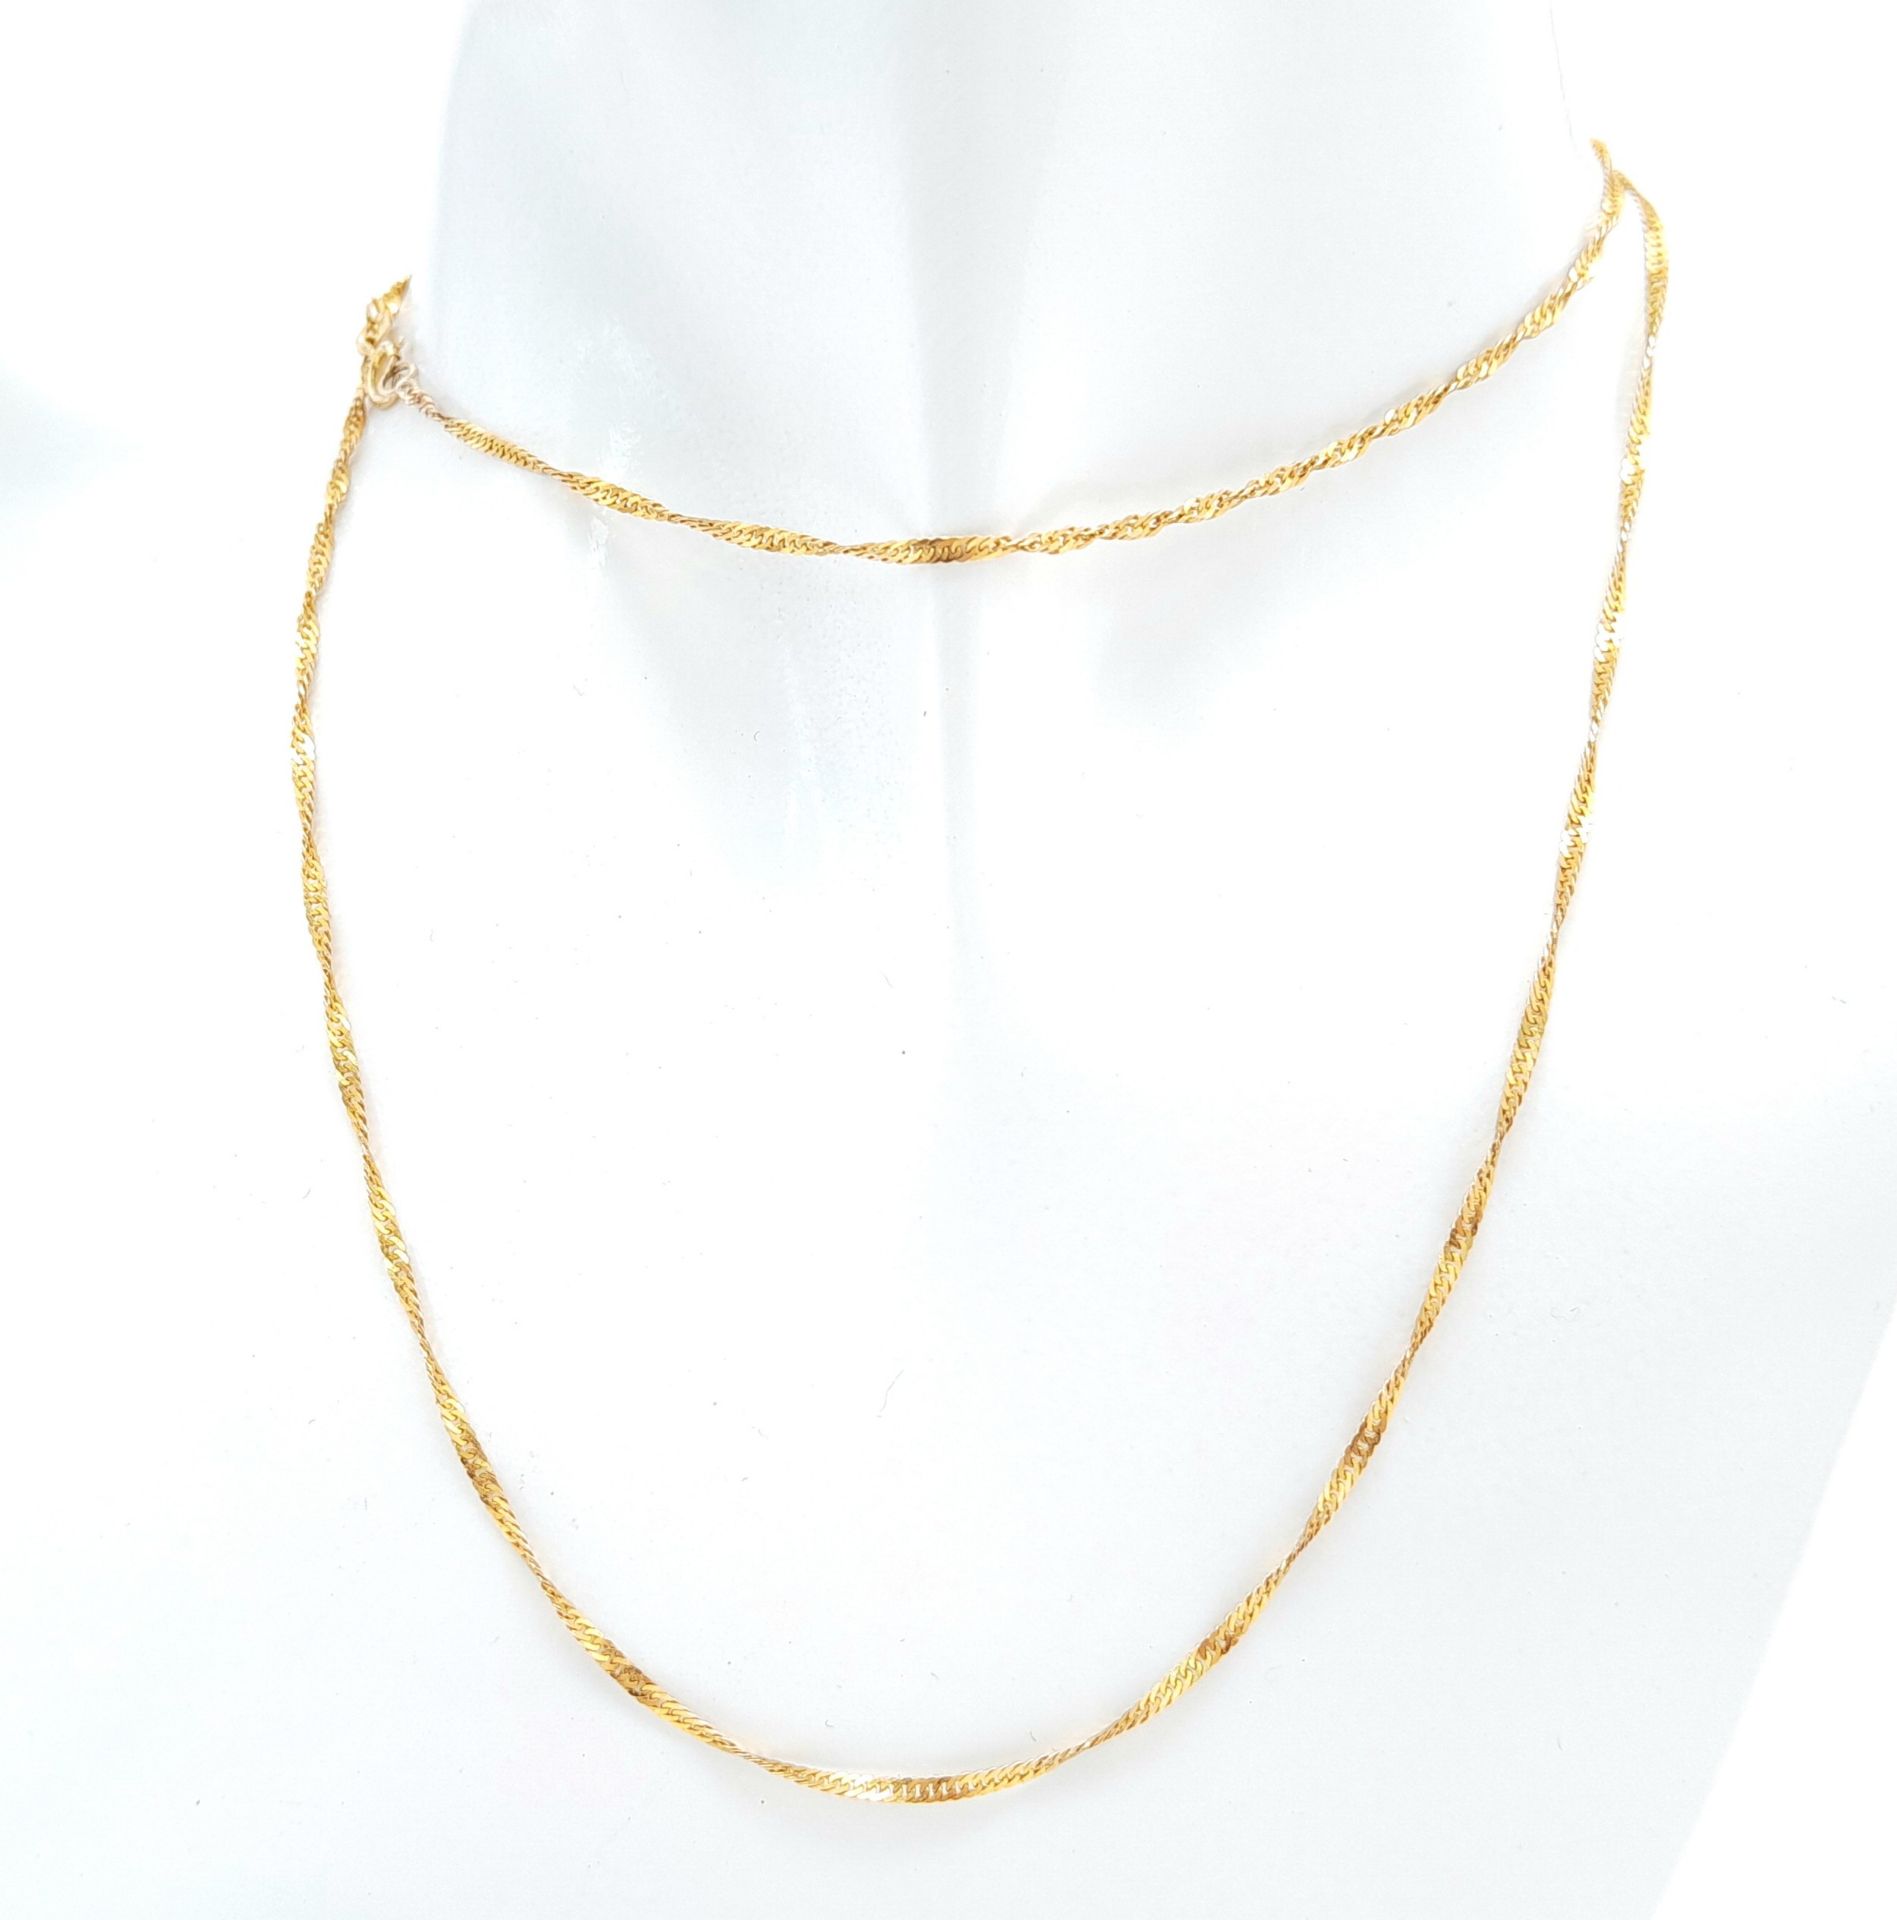 An elegant 9 K yellow gold rope chain necklace, length: 61 cm, weight: 2.3 g. - Image 3 of 11